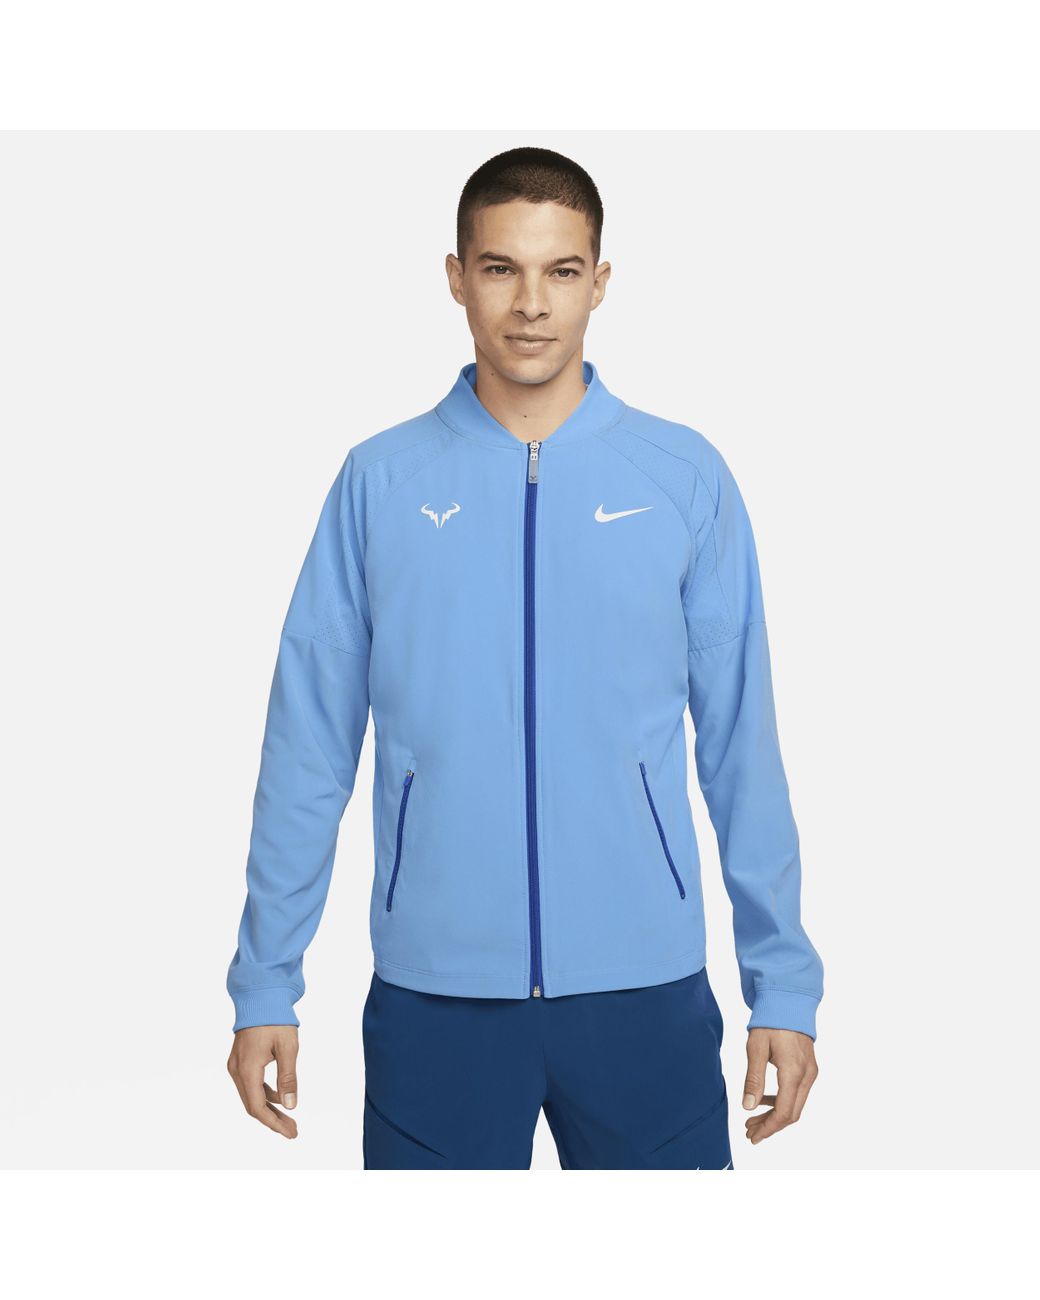 Nike Dry-Fit Academy AWF Jacket - White-Gold in 2023 | Nike dri fit, Nike,  Football jackets